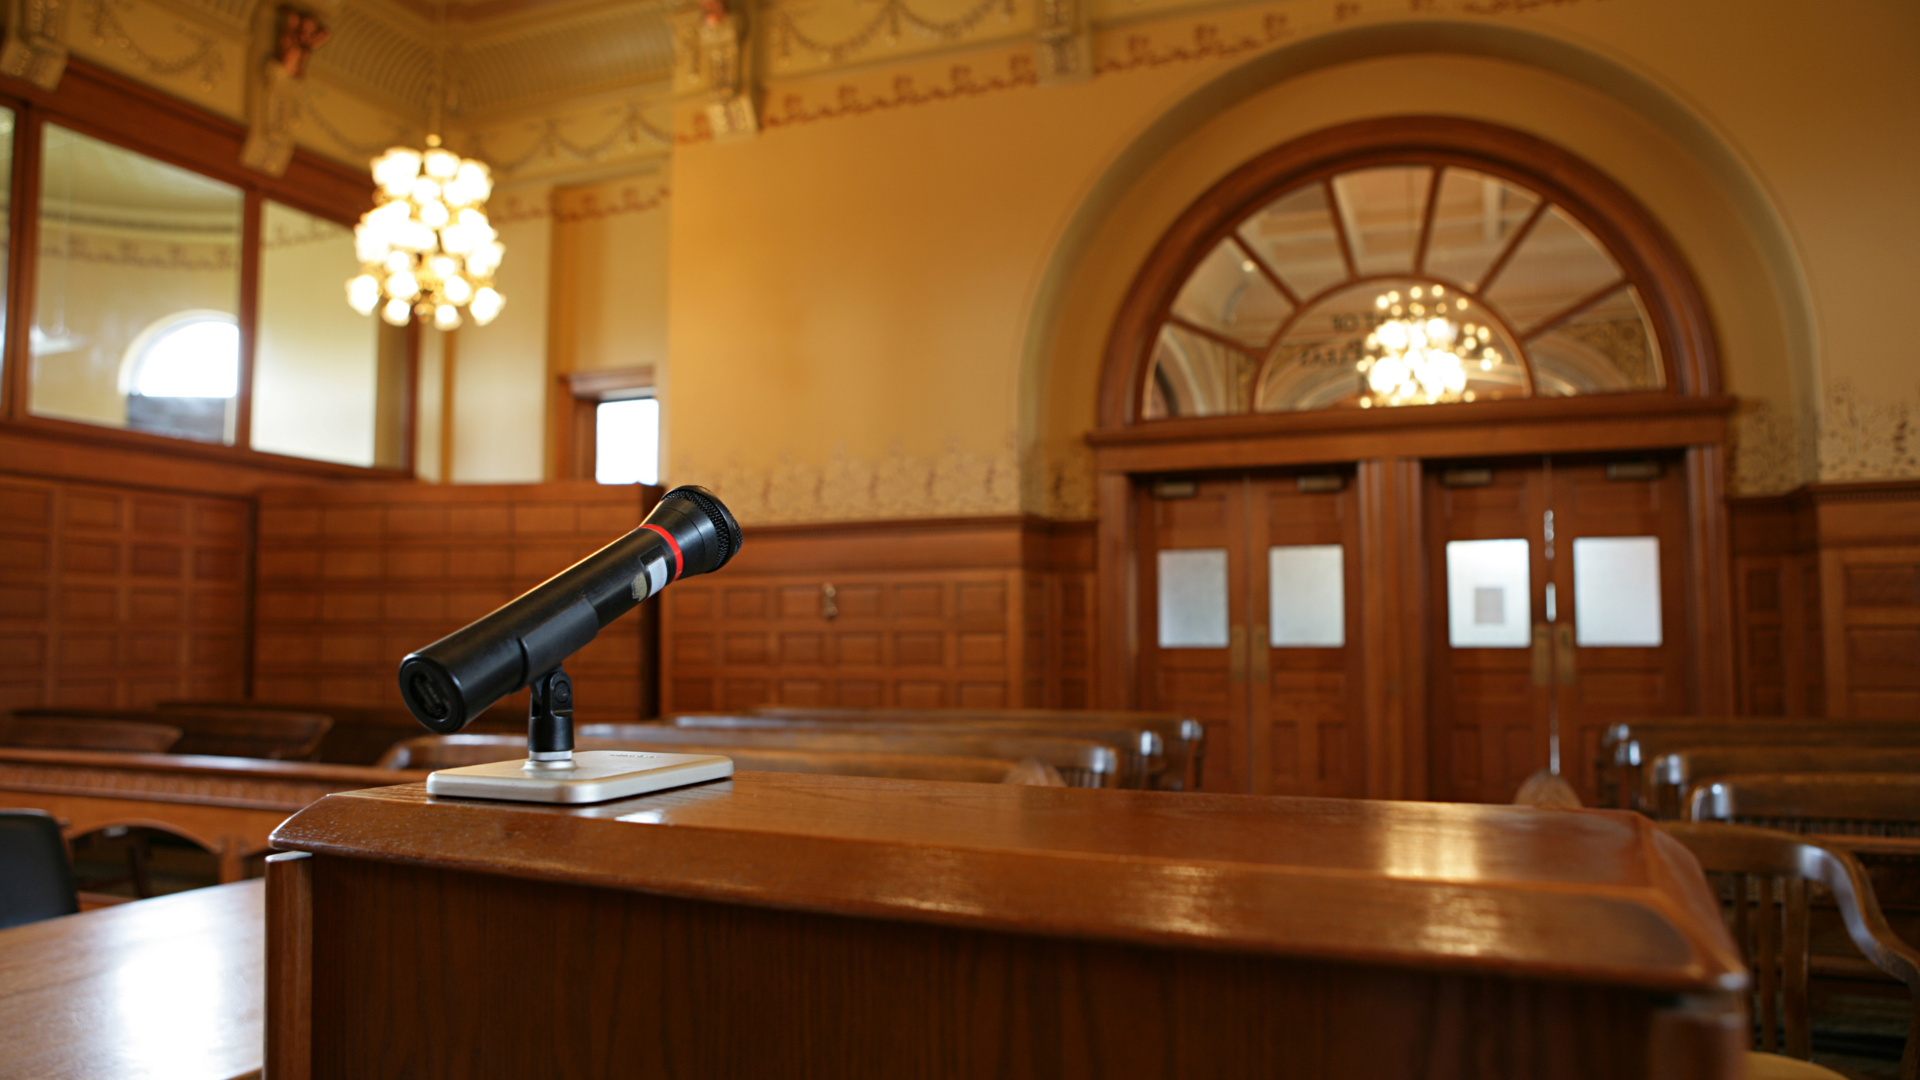 Constructive Cross-Examination vs. Destructive Cross-Examination: What’s the difference?